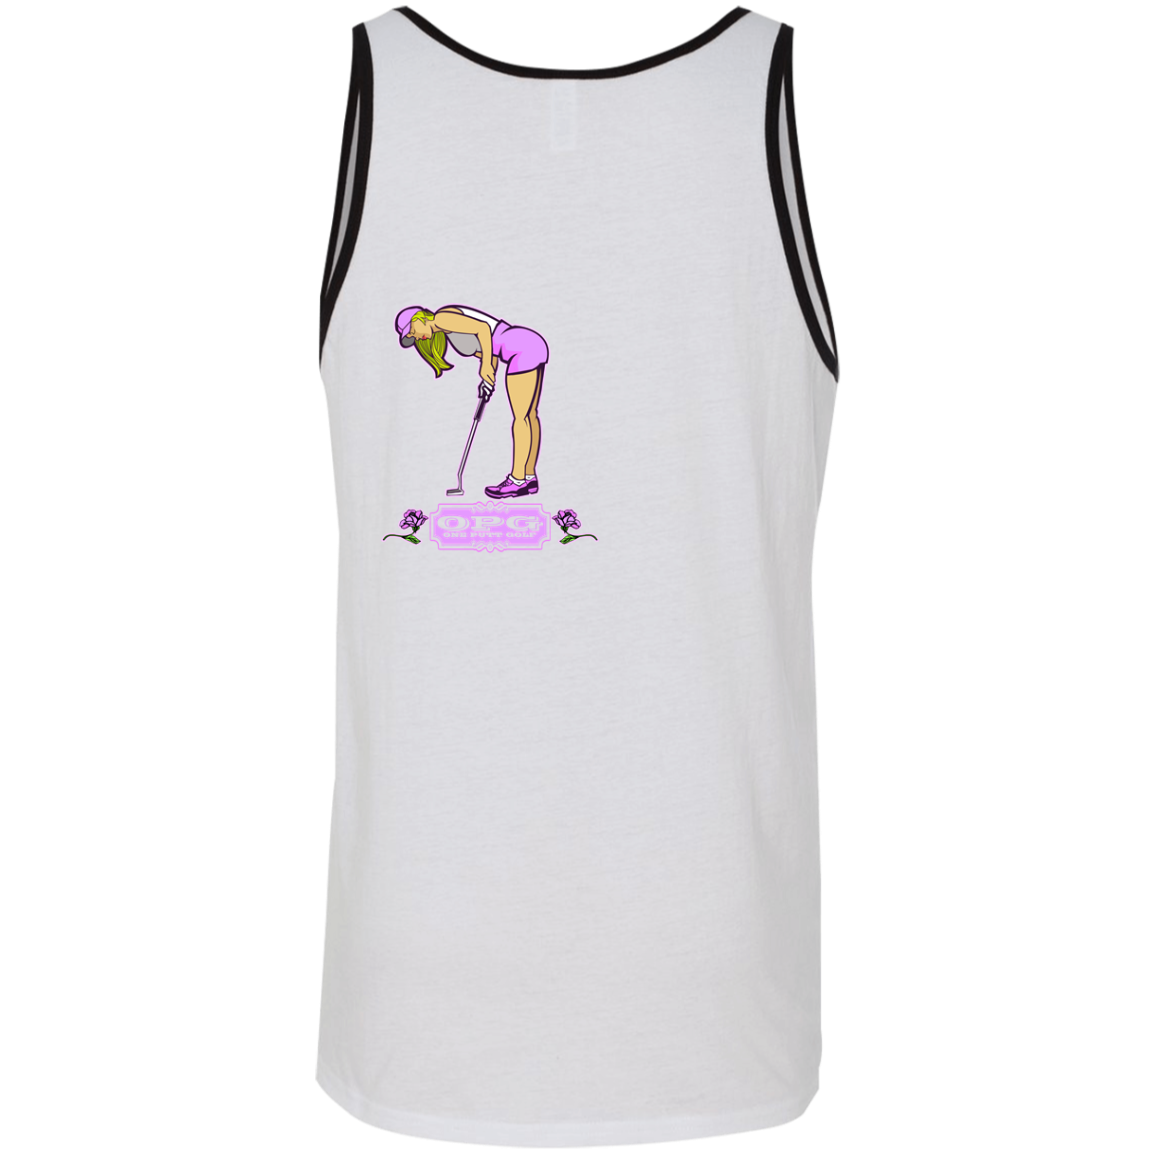 OPG Custom Design #13. Drive it. Chip it. One Putt Golf it. 2 Tone Tank 100% Combed and Ringspun Cotton